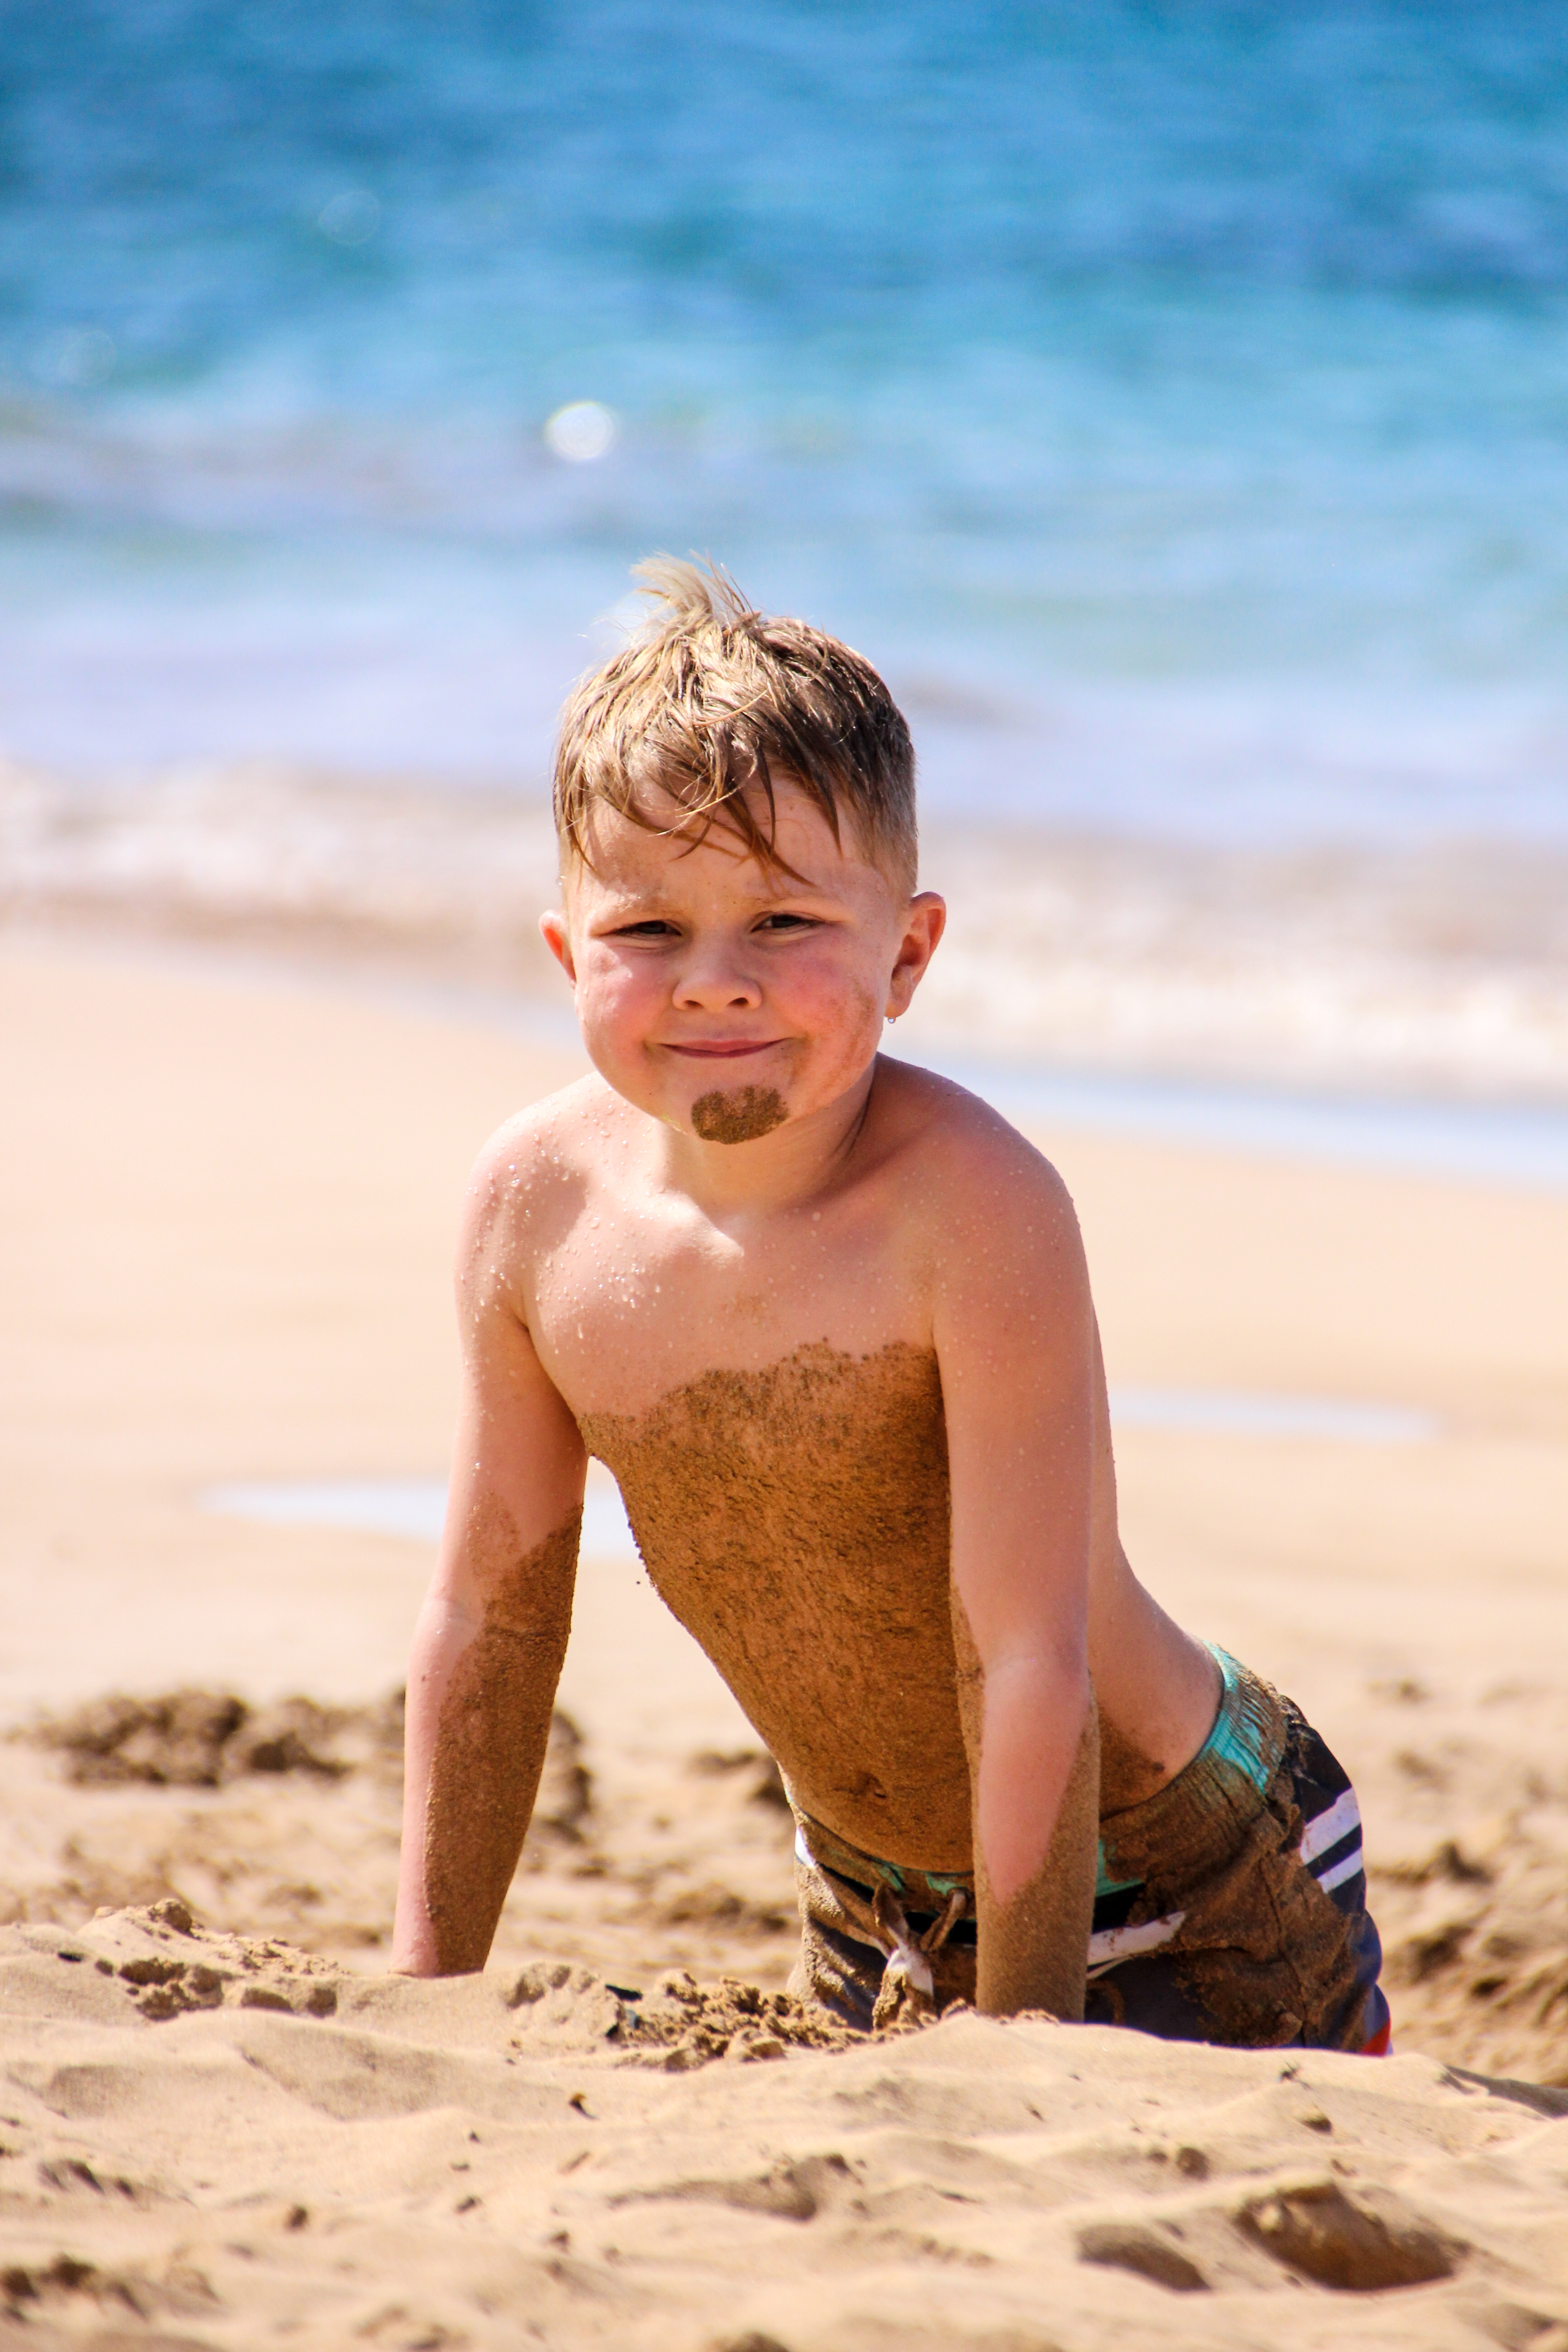 A little boy is playing in the sand at the beach.